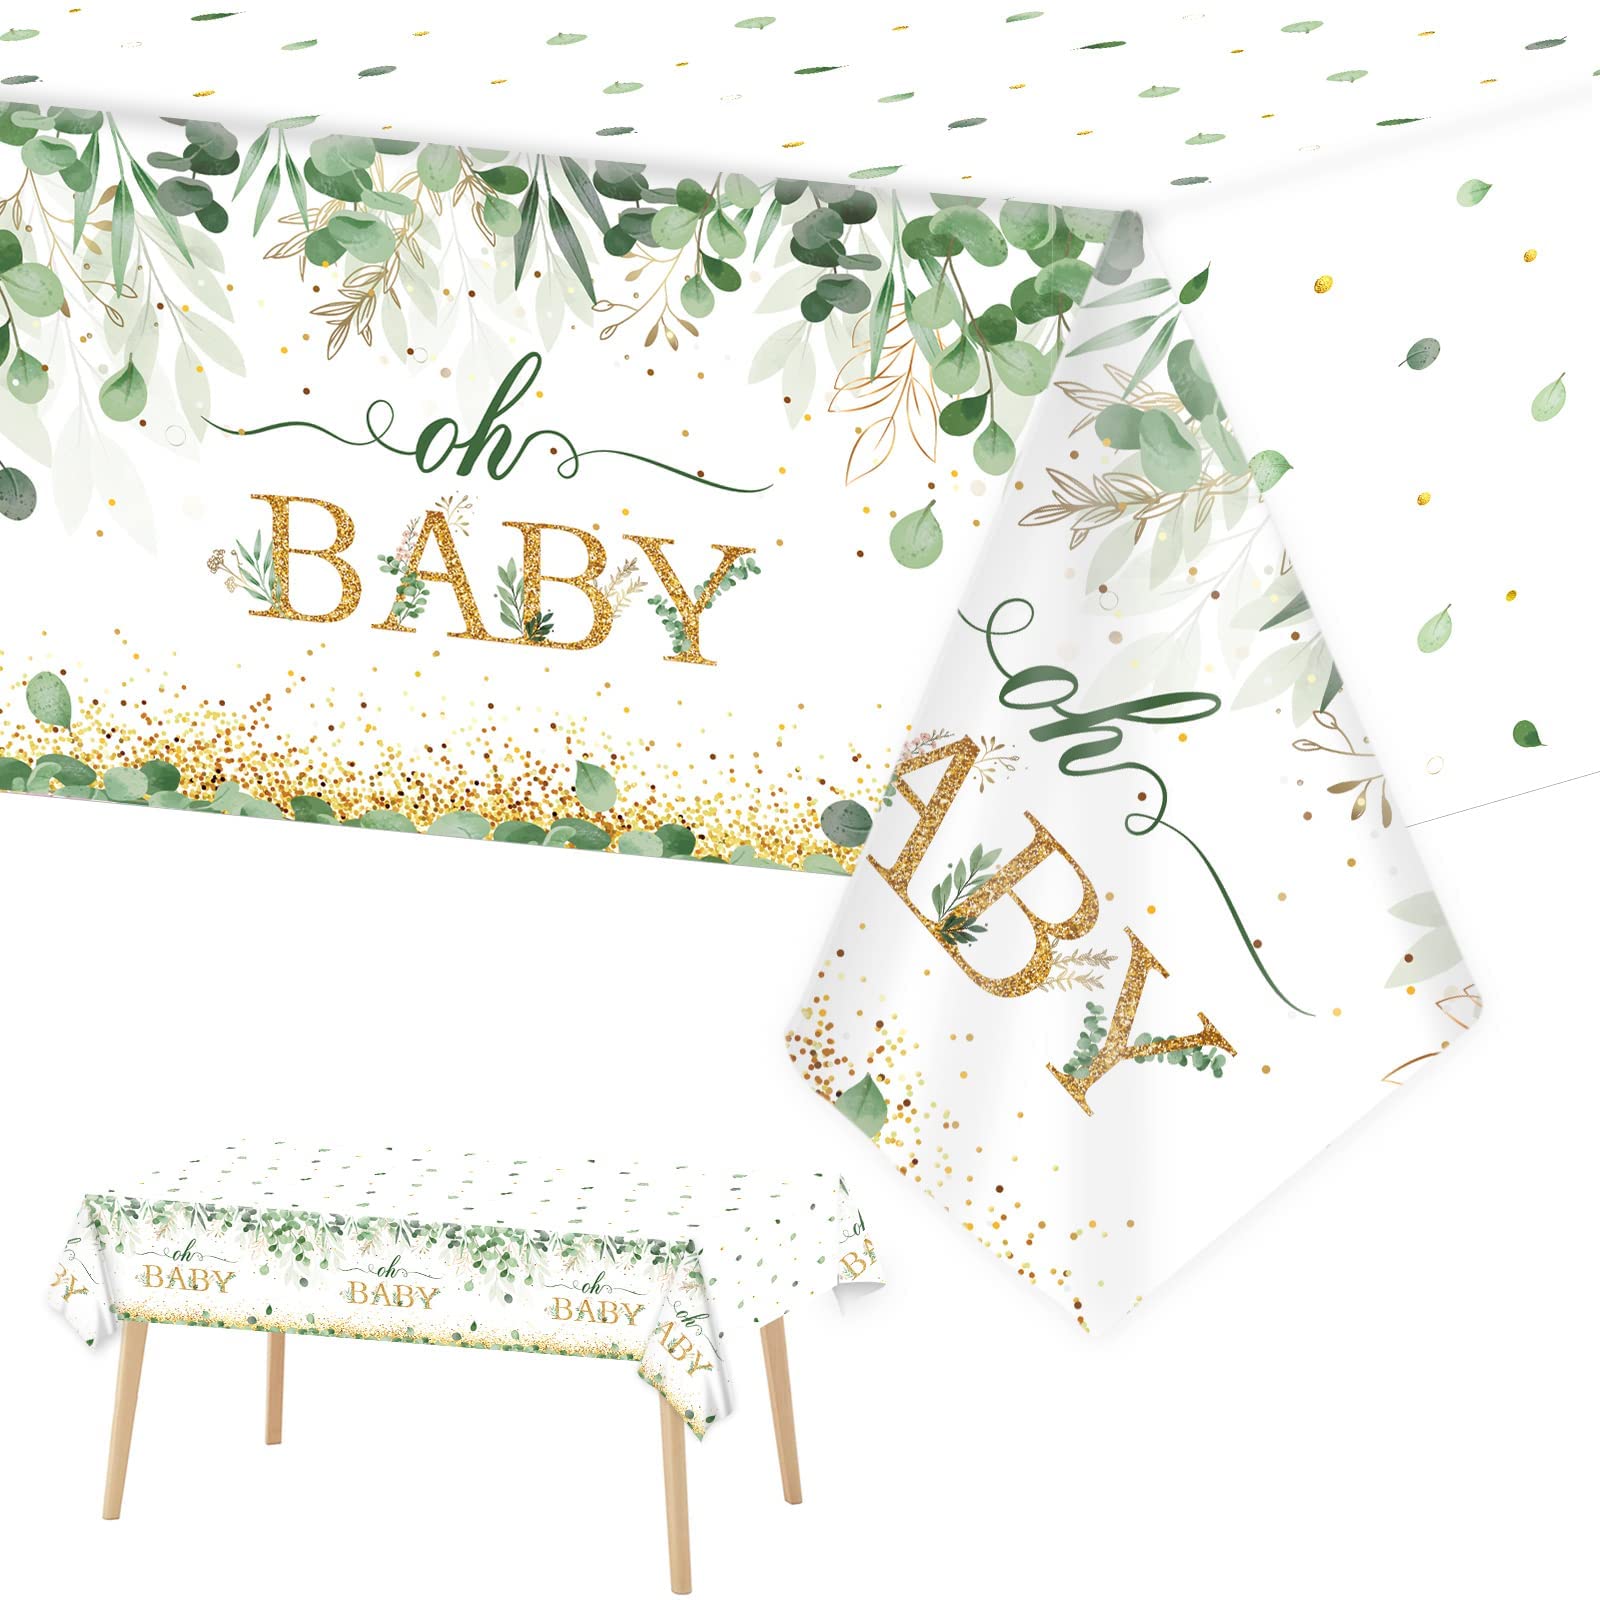 Tevxj 3 Pieces Sage Greenery Oh Baby Tablecloths for Baby Shower Party Decorations Plastic Disposable Gold Foil Eucalyptus Leaf Table 